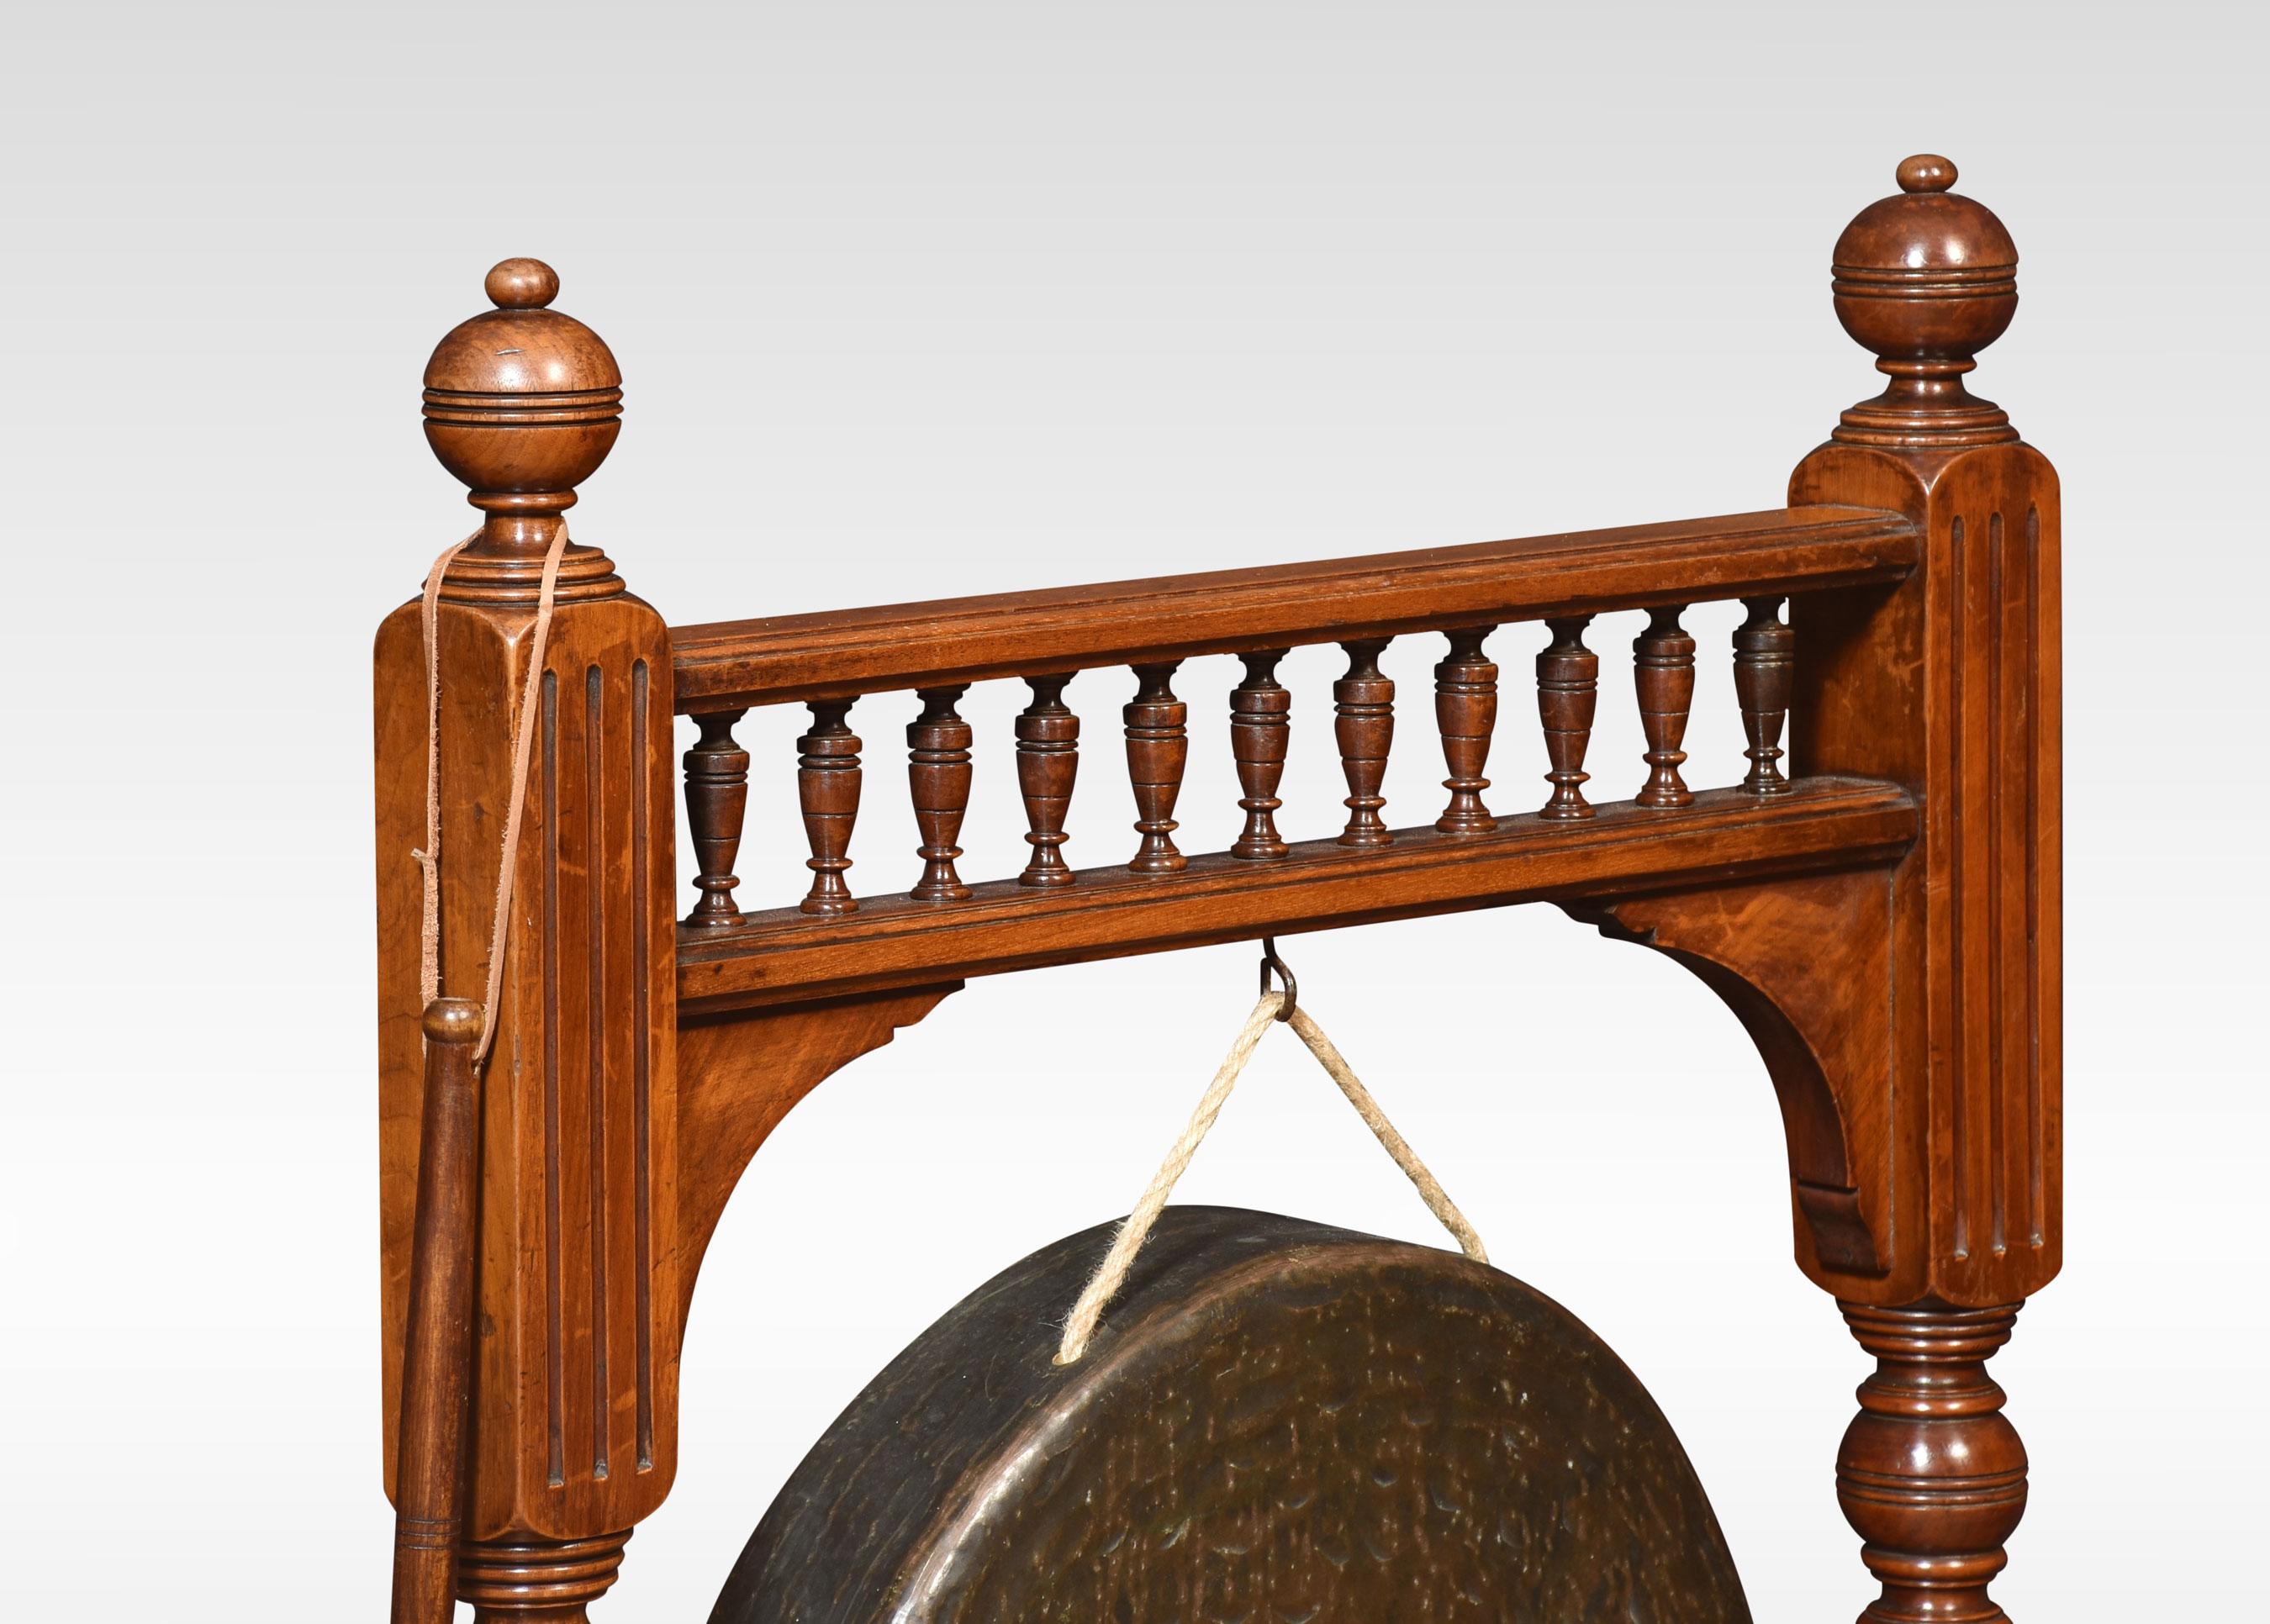 Large Carved walnut dinner gong, the frame with carved decoration. Flanked by carved fluted uprights. All raised up on trestle base, with a striker.
Dimensions
Height 39 Inches
Width 25.5 Inches
Depth 12 Inches